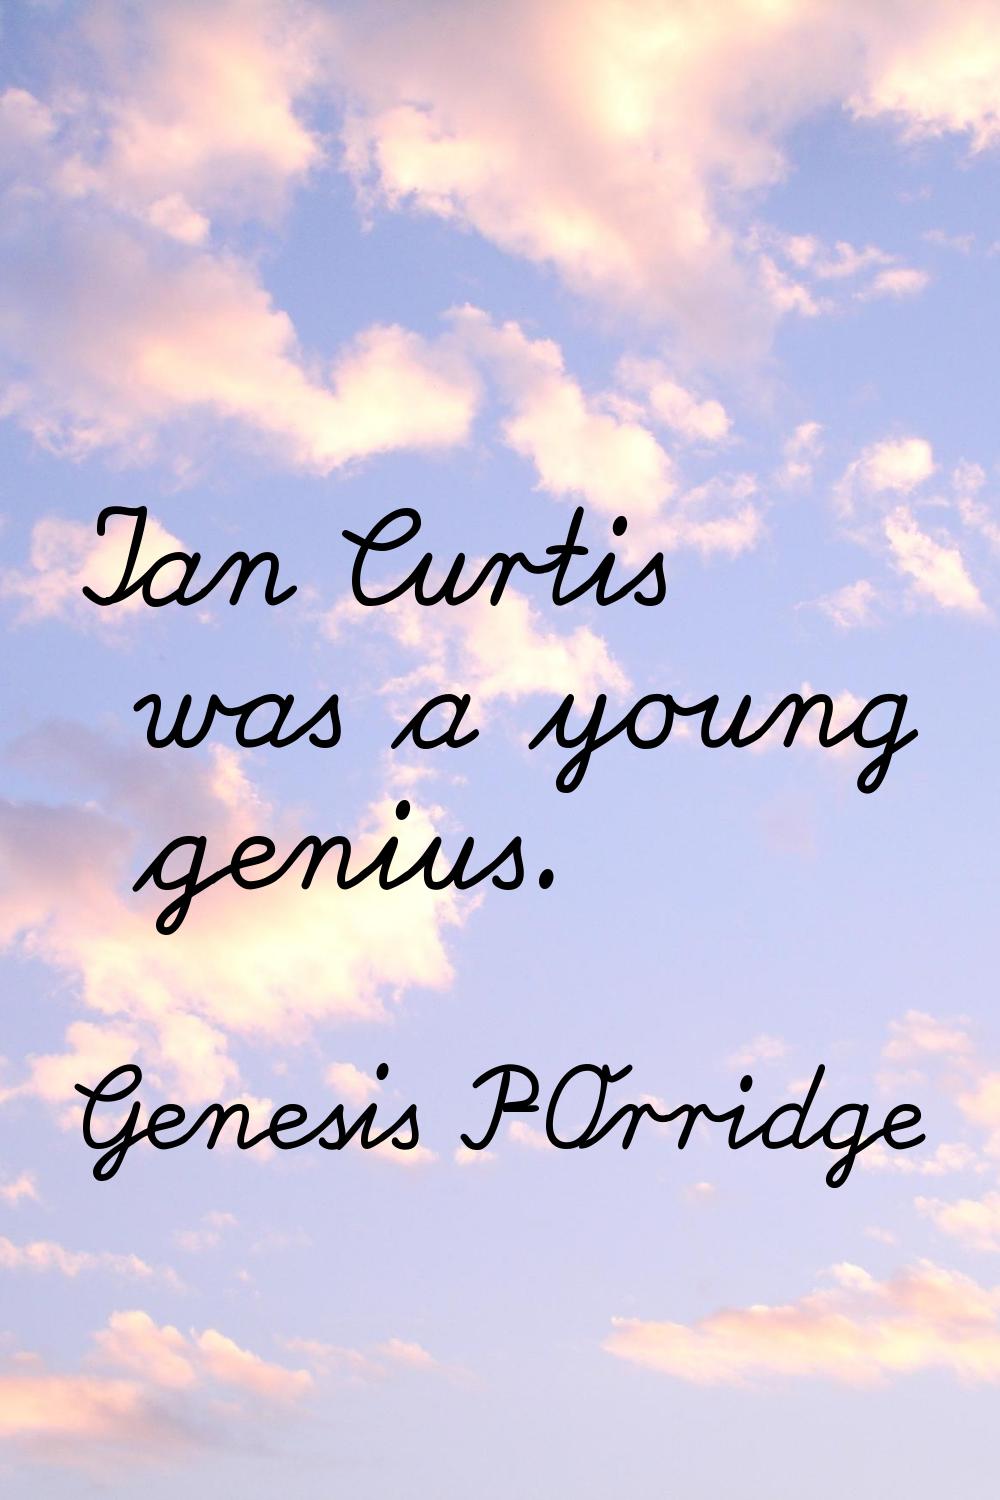 Ian Curtis was a young genius.